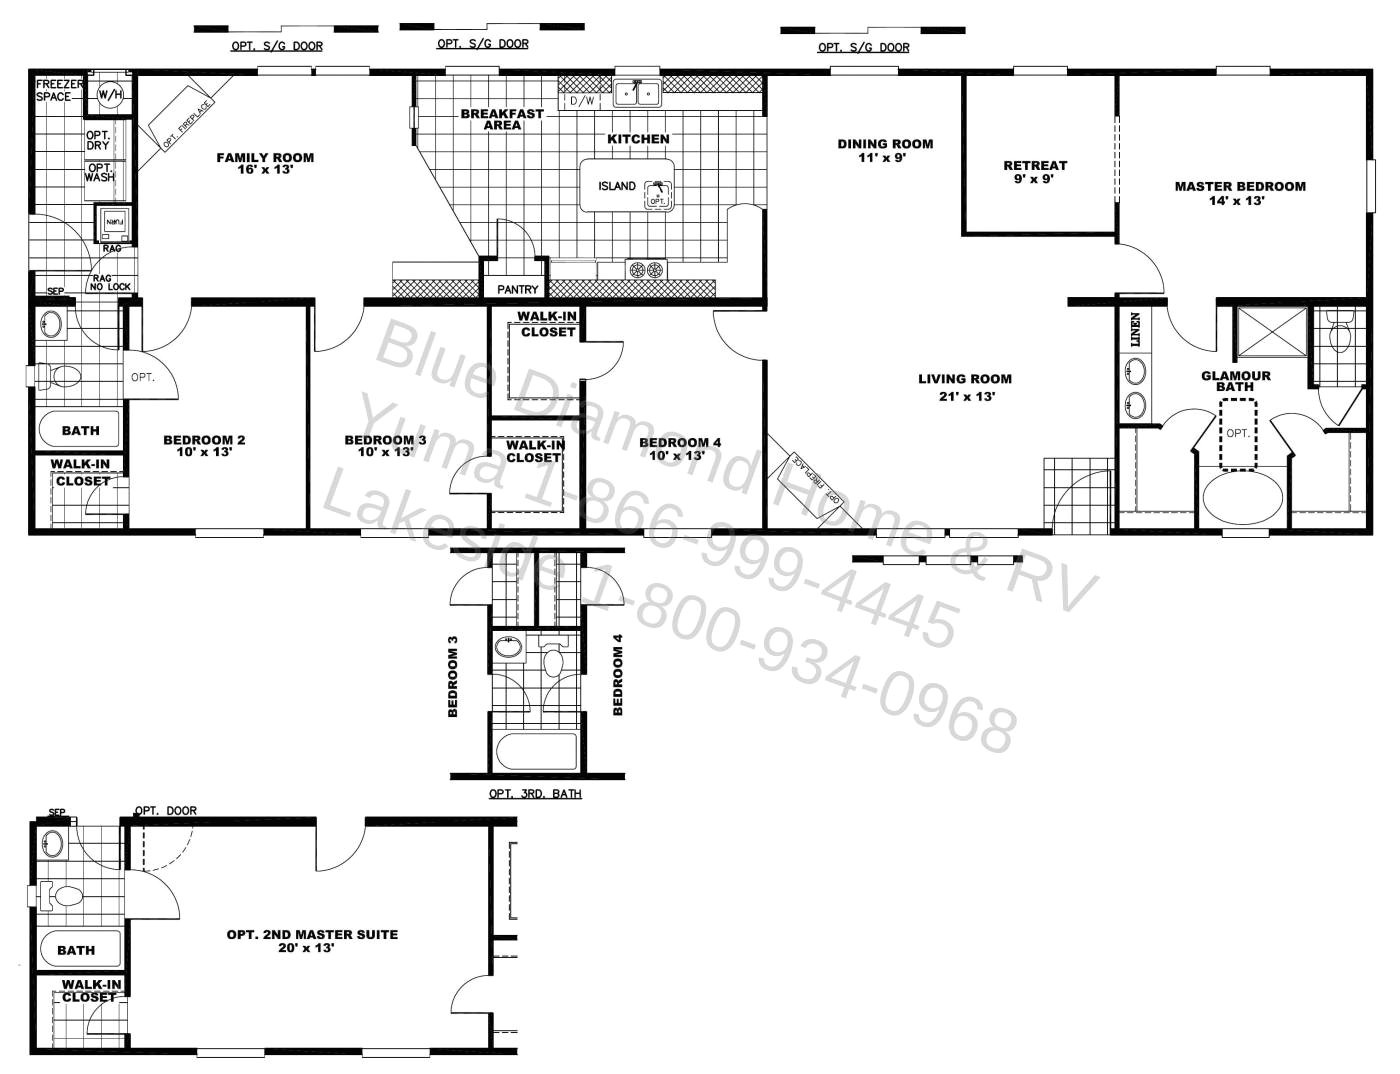 Home Plans with 2 Master Suites 2 Story House Plans with Two Master Suites Home Deco Plans